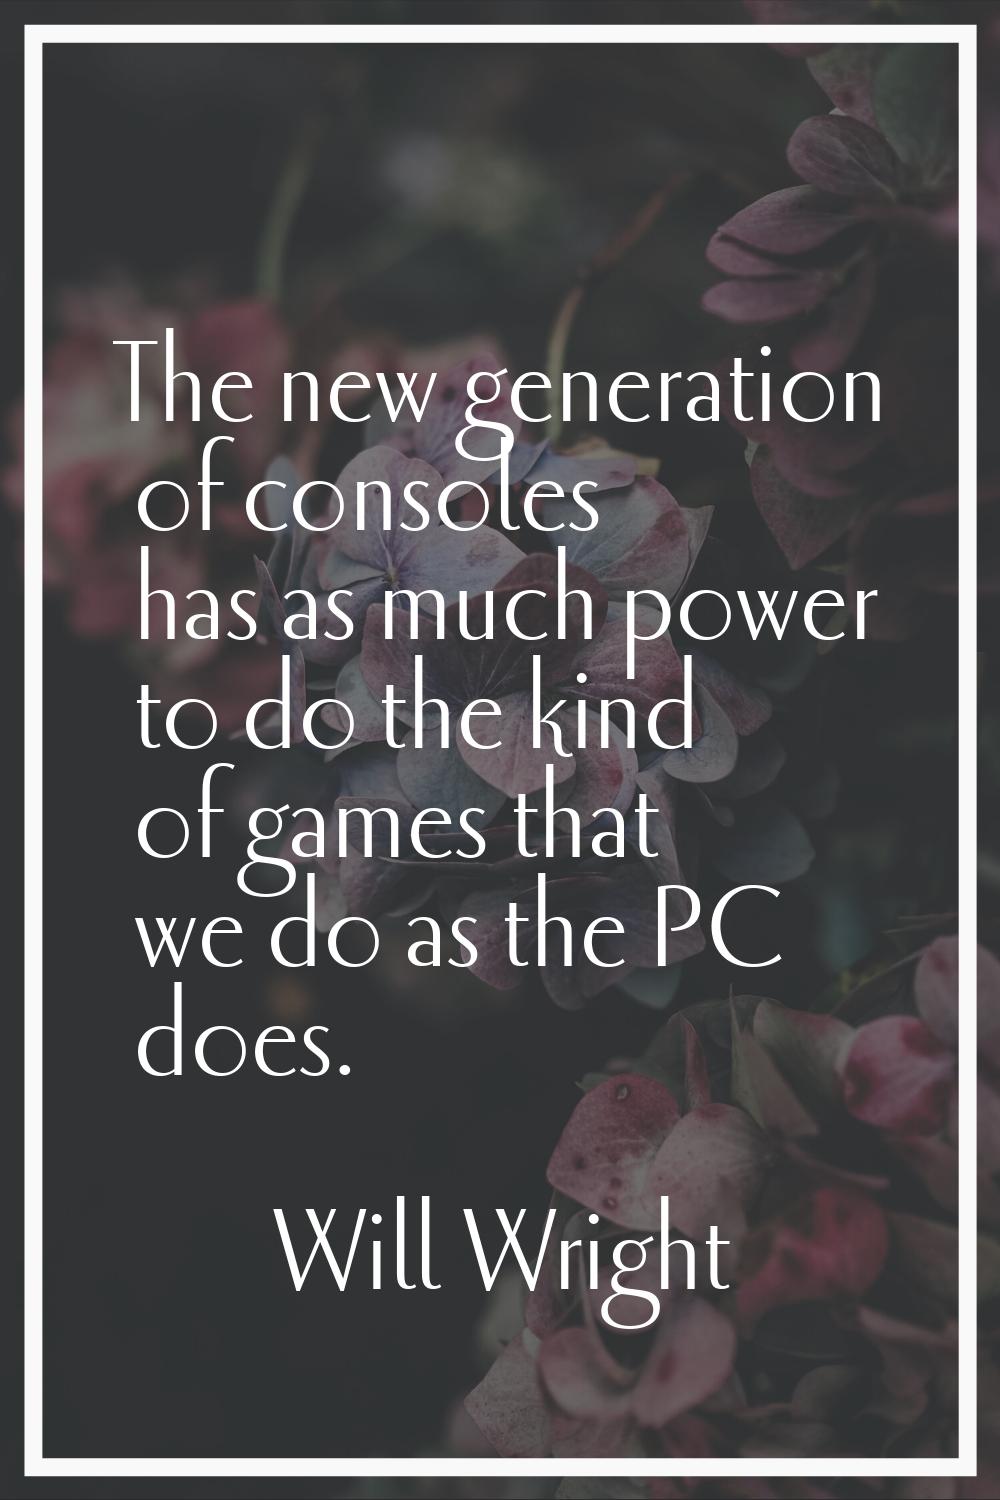 The new generation of consoles has as much power to do the kind of games that we do as the PC does.